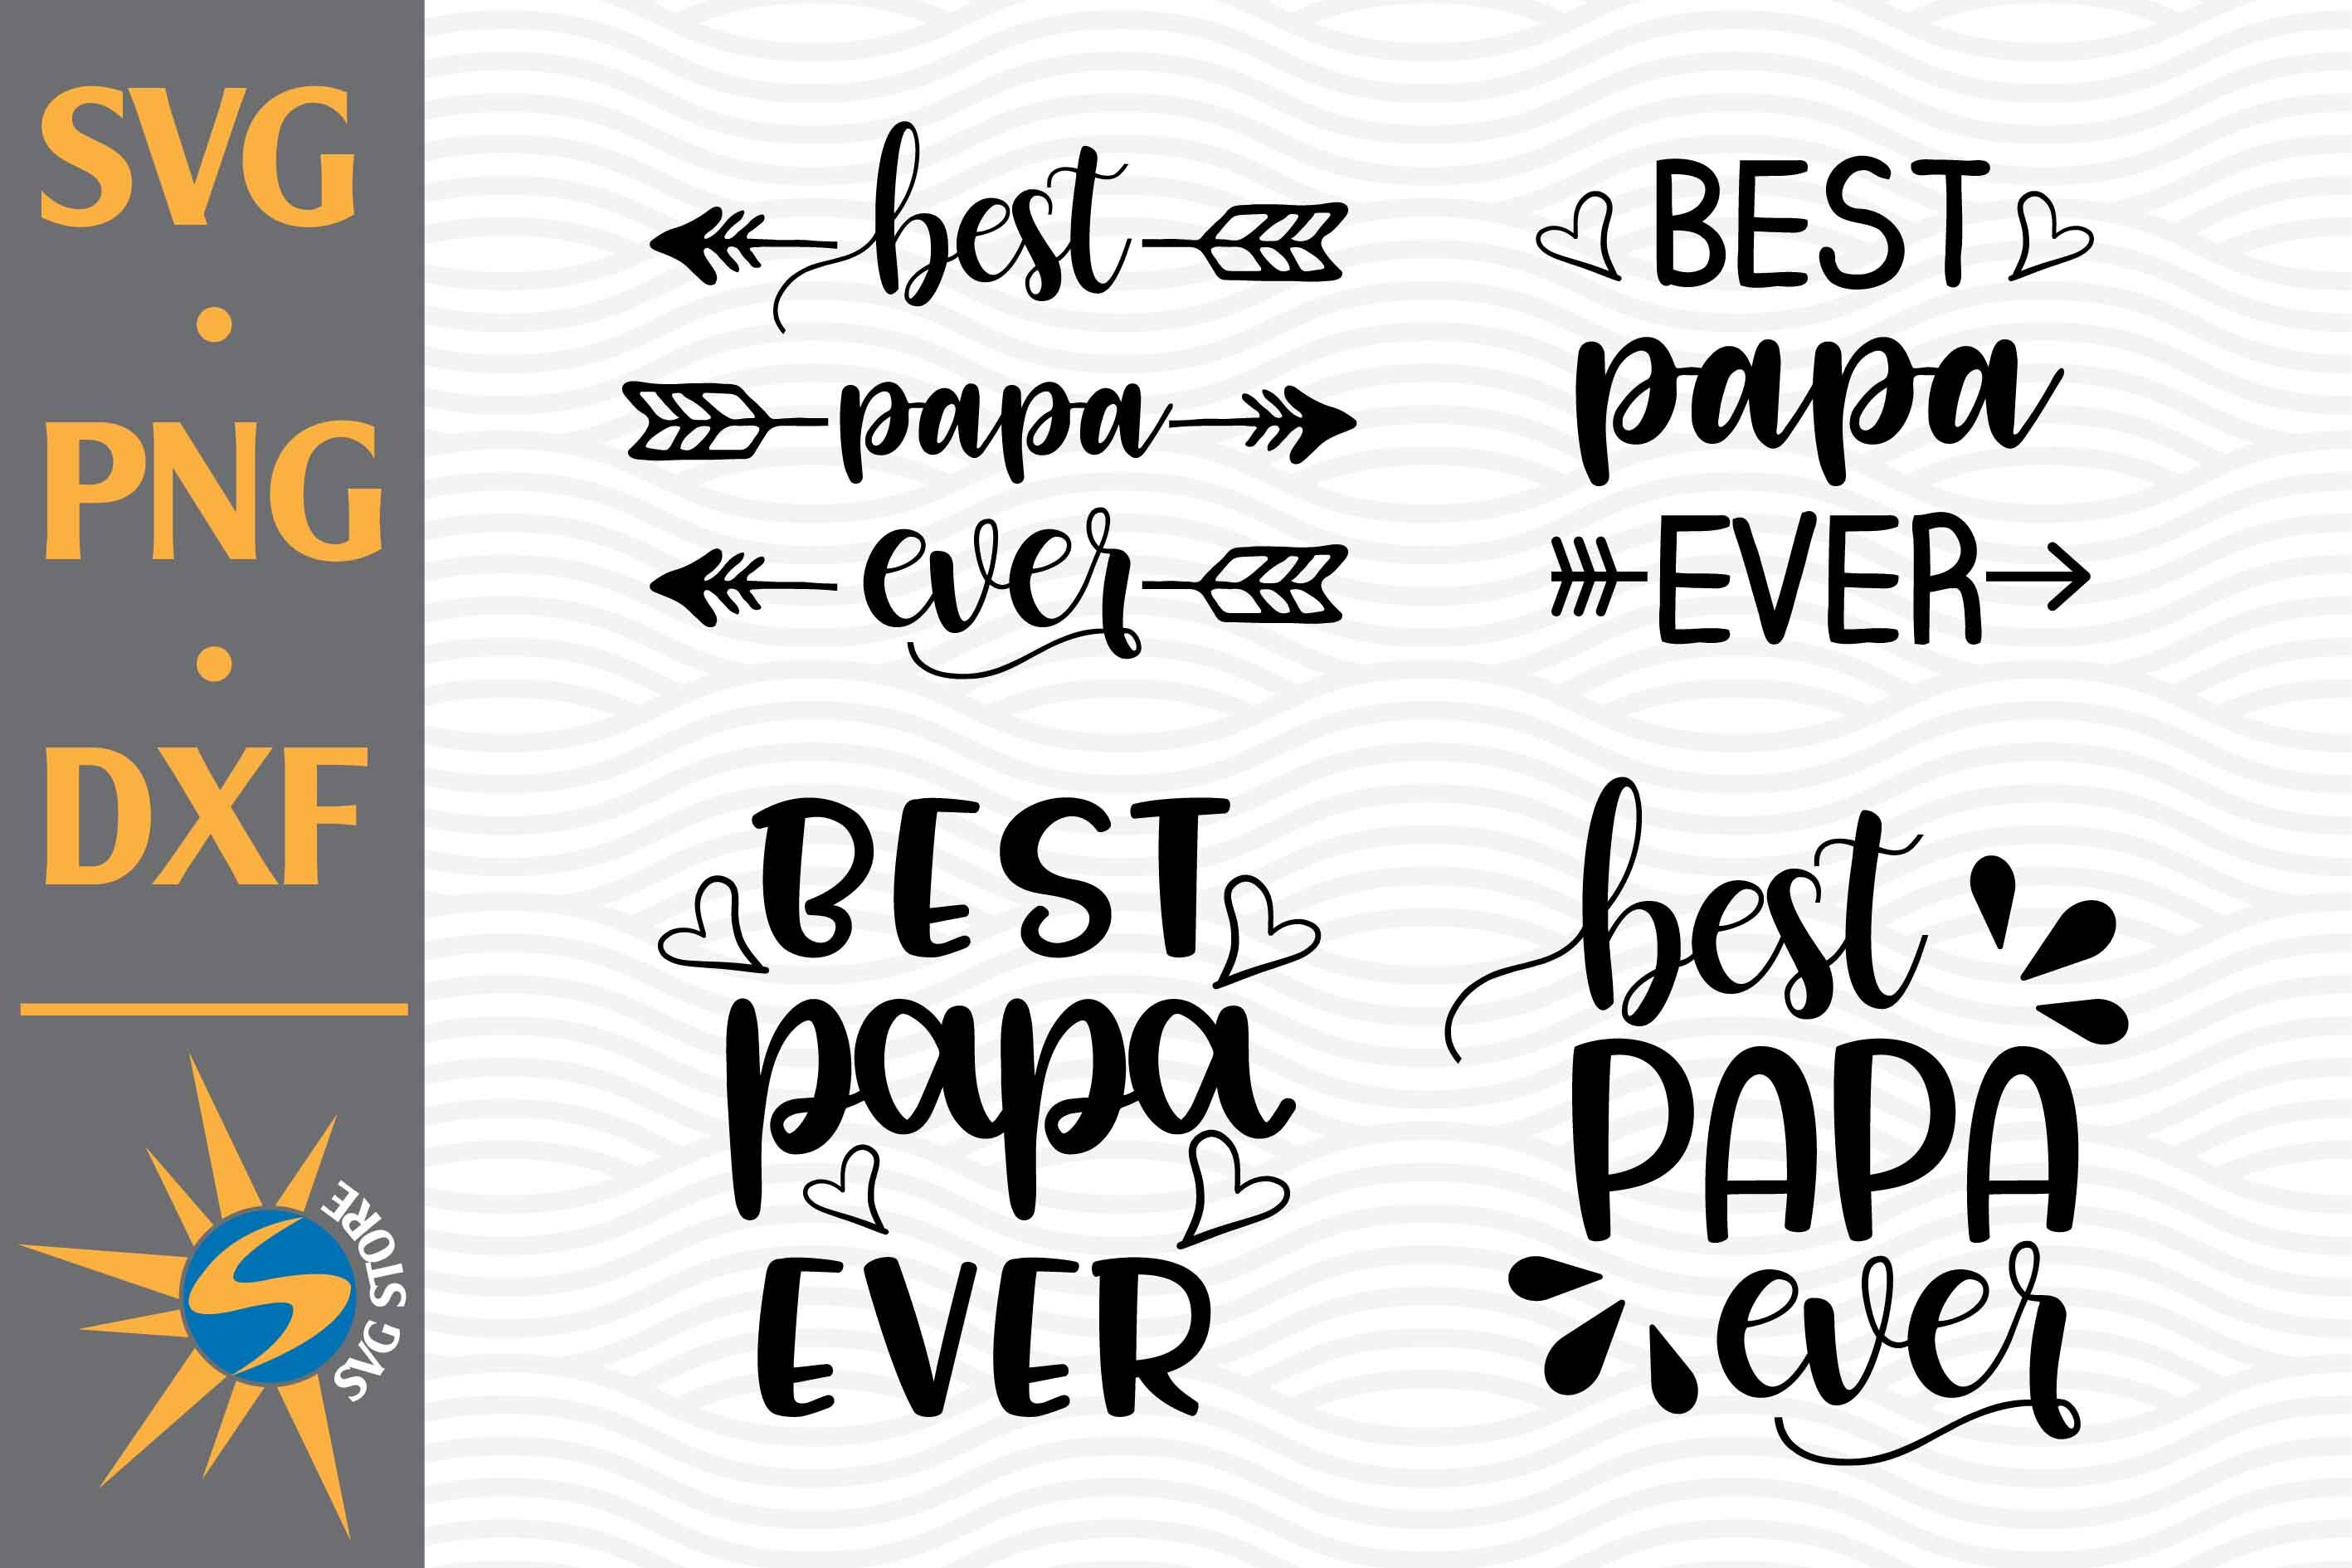 Best Papa Ever SVG, PNG, DXF Digital Files Include By ...